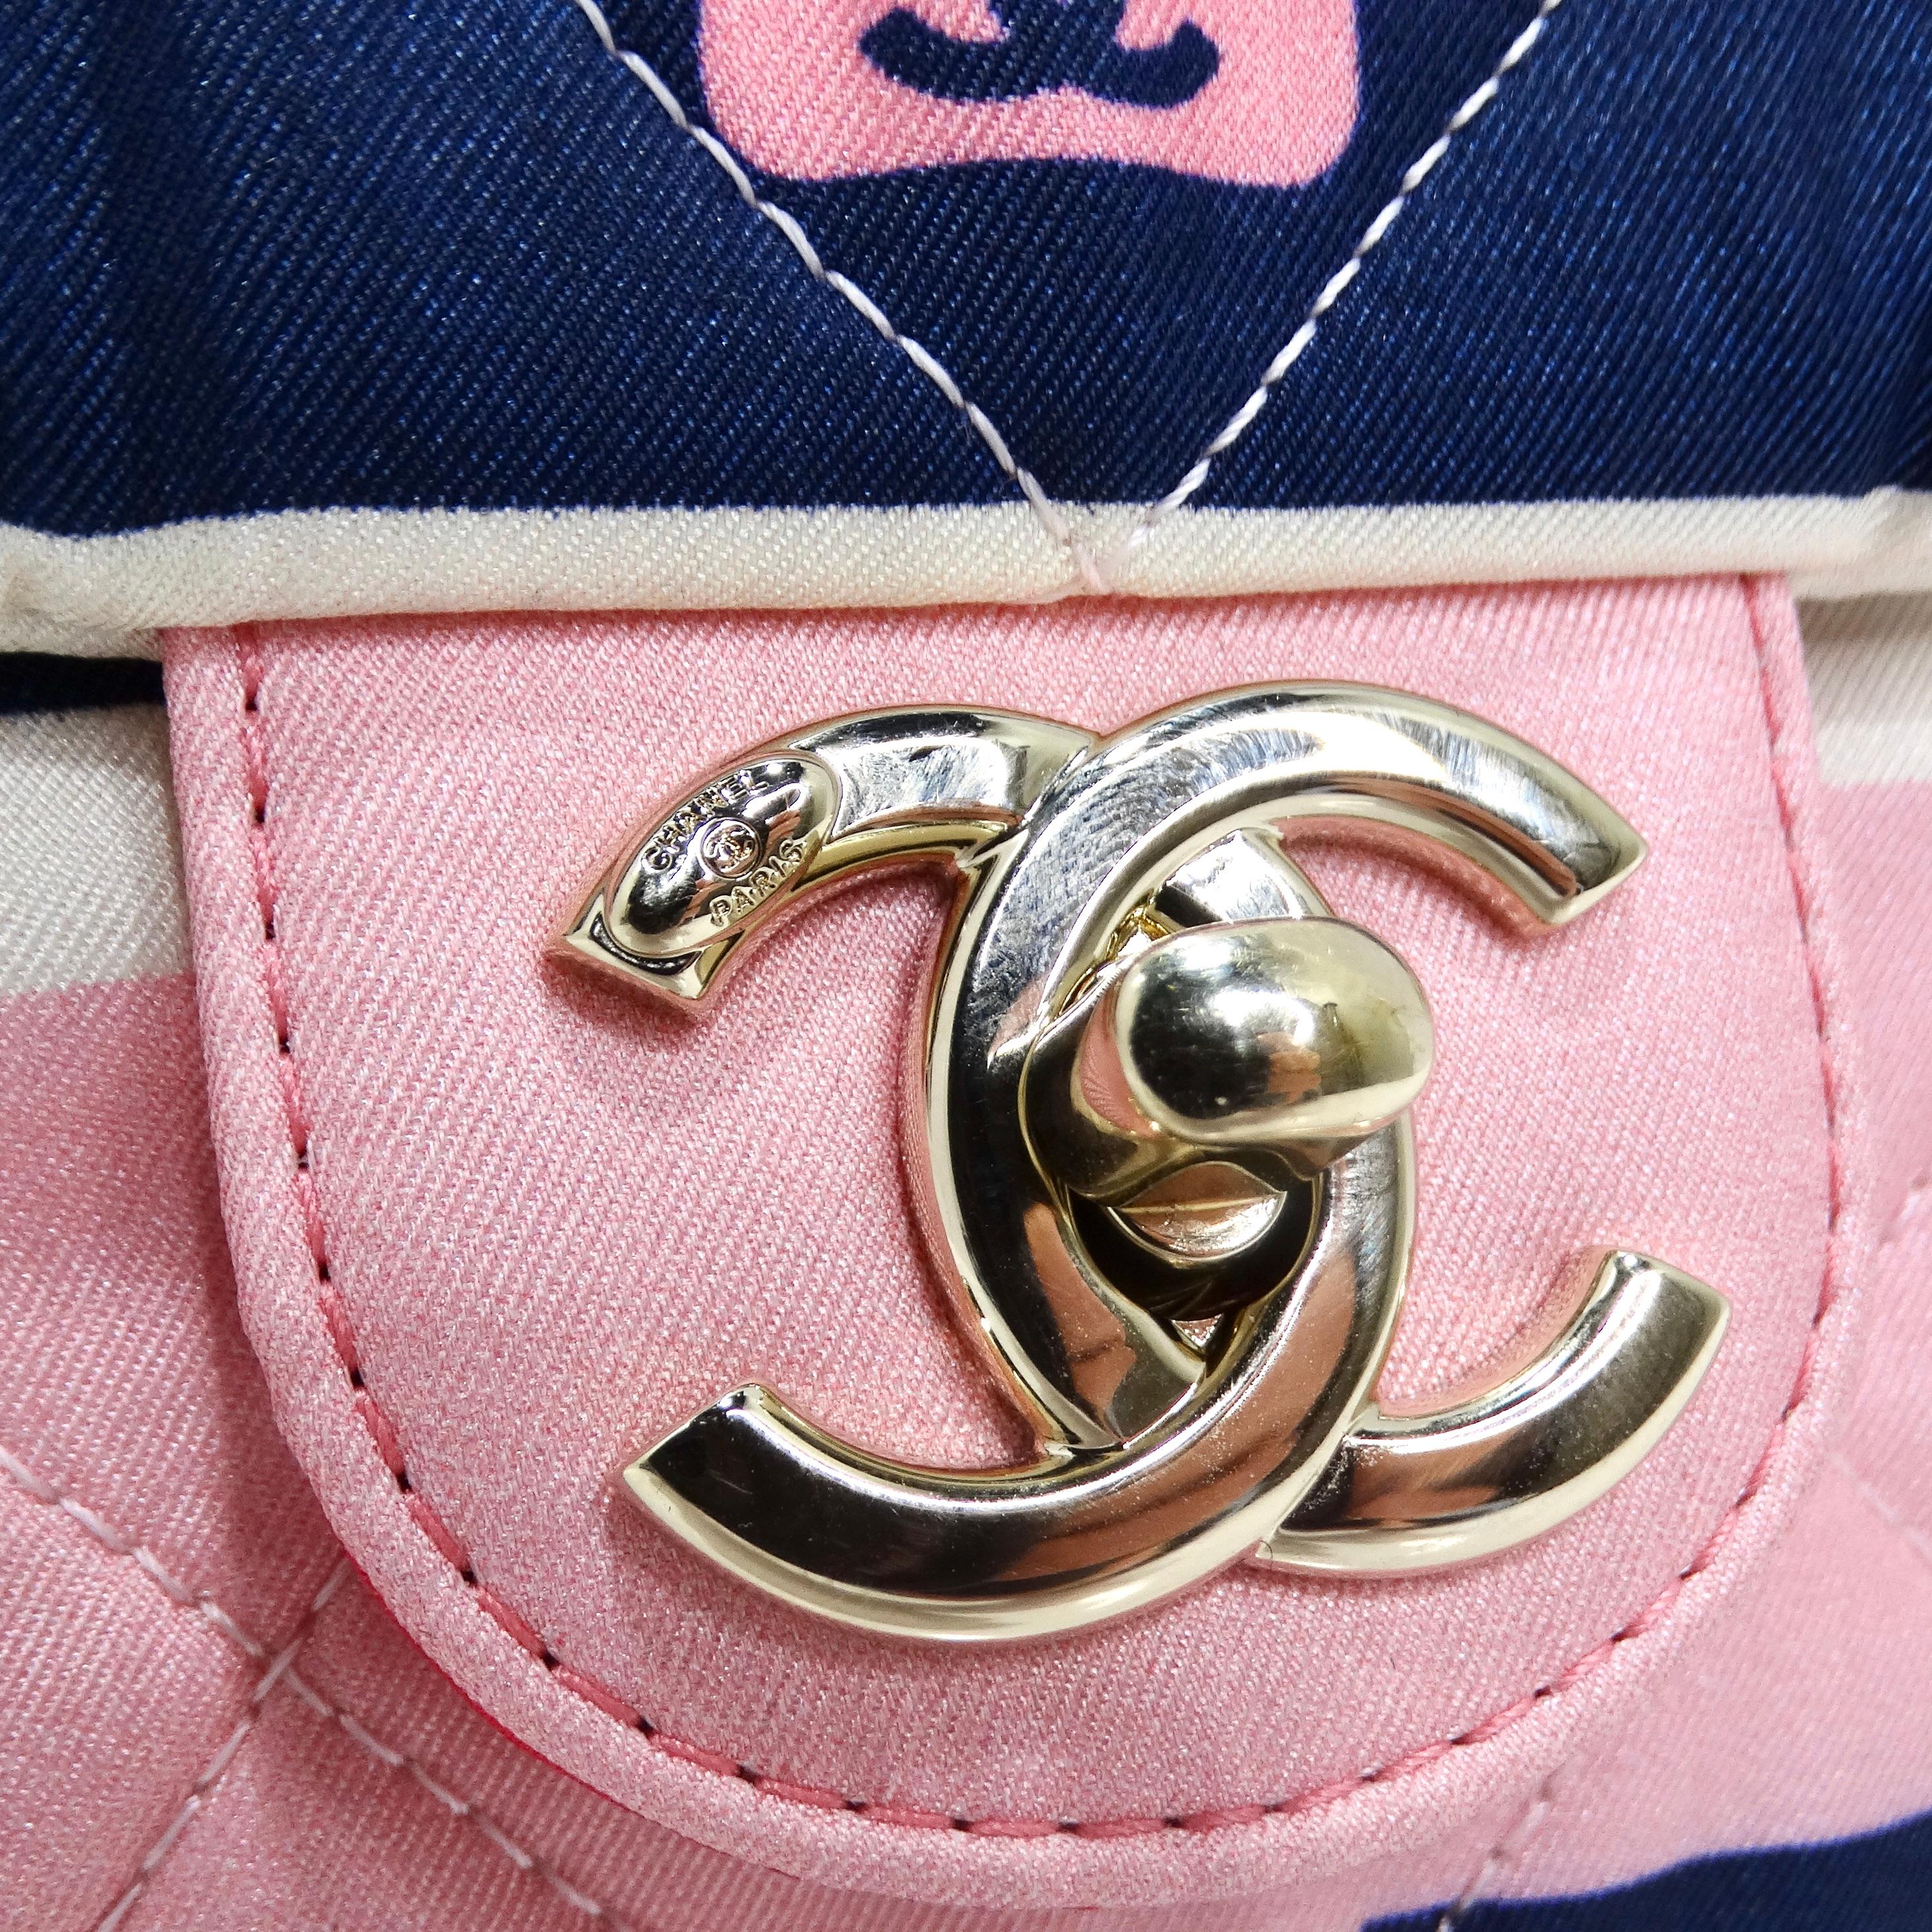 Introducing the Chanel 2021 Jumbo Print Graphic Pink Black Quilted Flap Shoulder Bag – a whimsical and vibrant addition to your collection. This classic Chanel Flap bag features a playful gradient pink and navy print adorned with images of Chanel